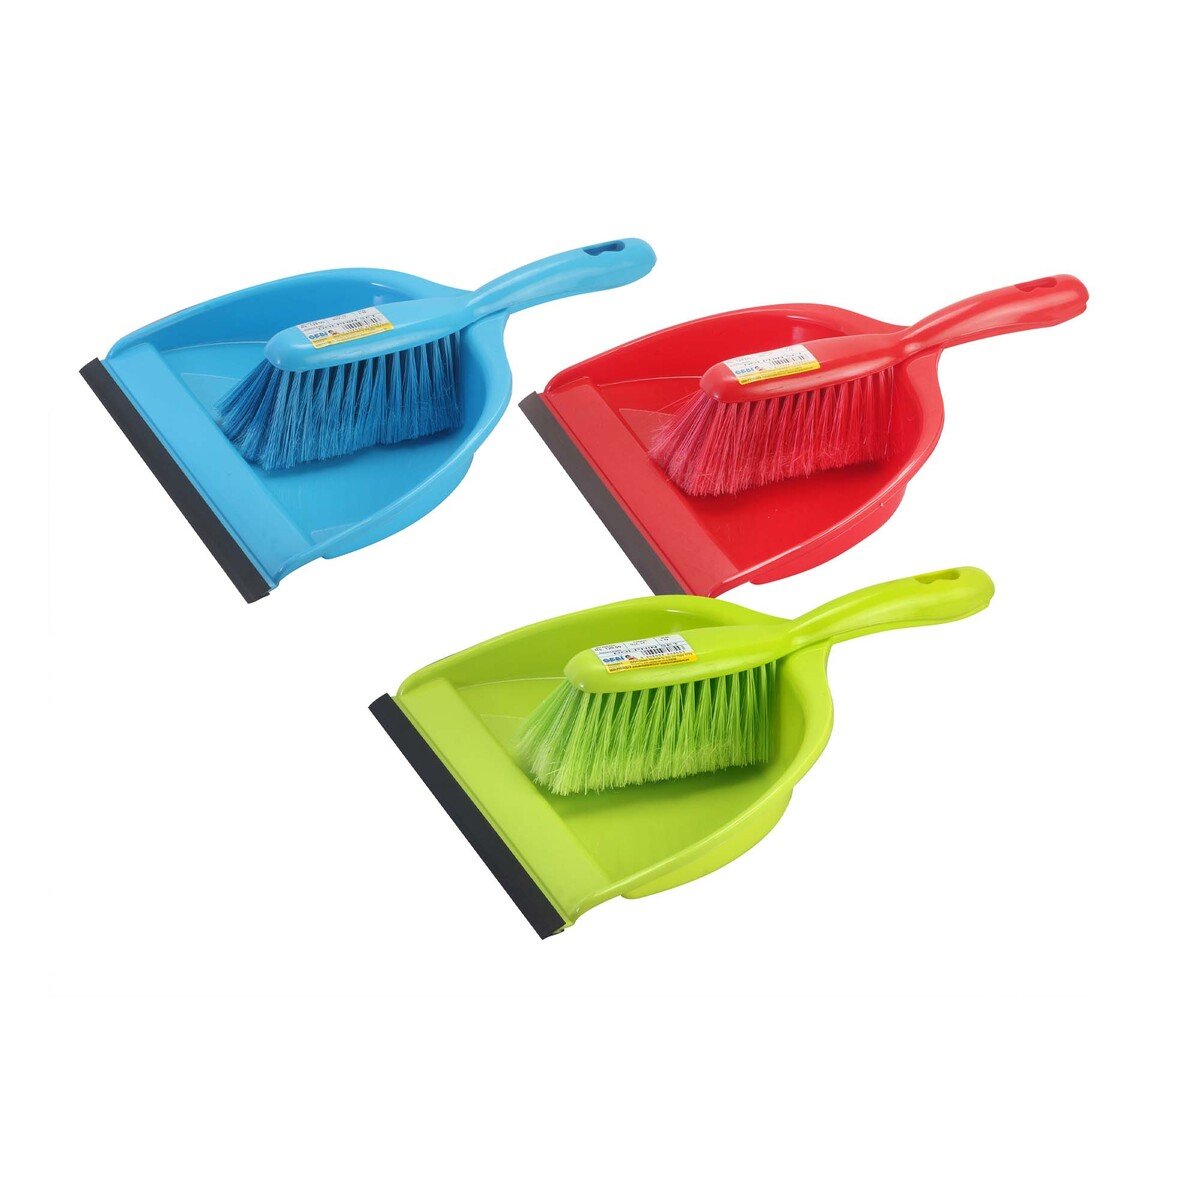 Gebi Deluxe Dolphin Dust Pan with Brush 855, 1 pc, Assorted Colors